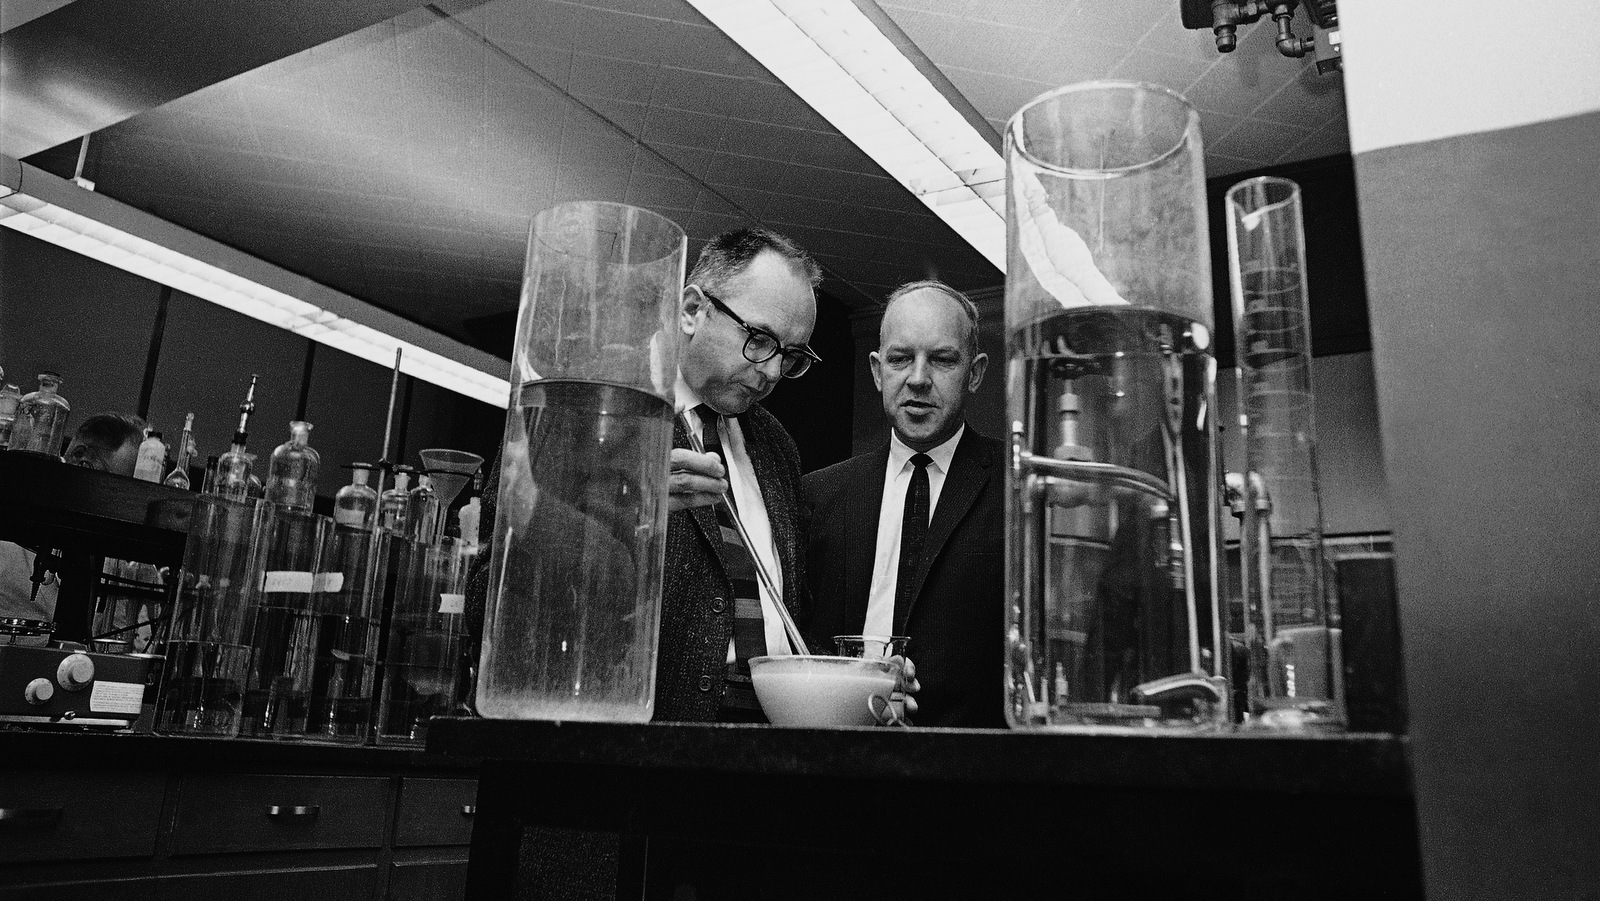 Dr. Warren R. Lawson, right, and R. E. Frazier run milk through tests at Minnesota Department of Health laboratories on May 13, 1964 to determine effects of nuclear fallout. (AP/Gene Herrick)